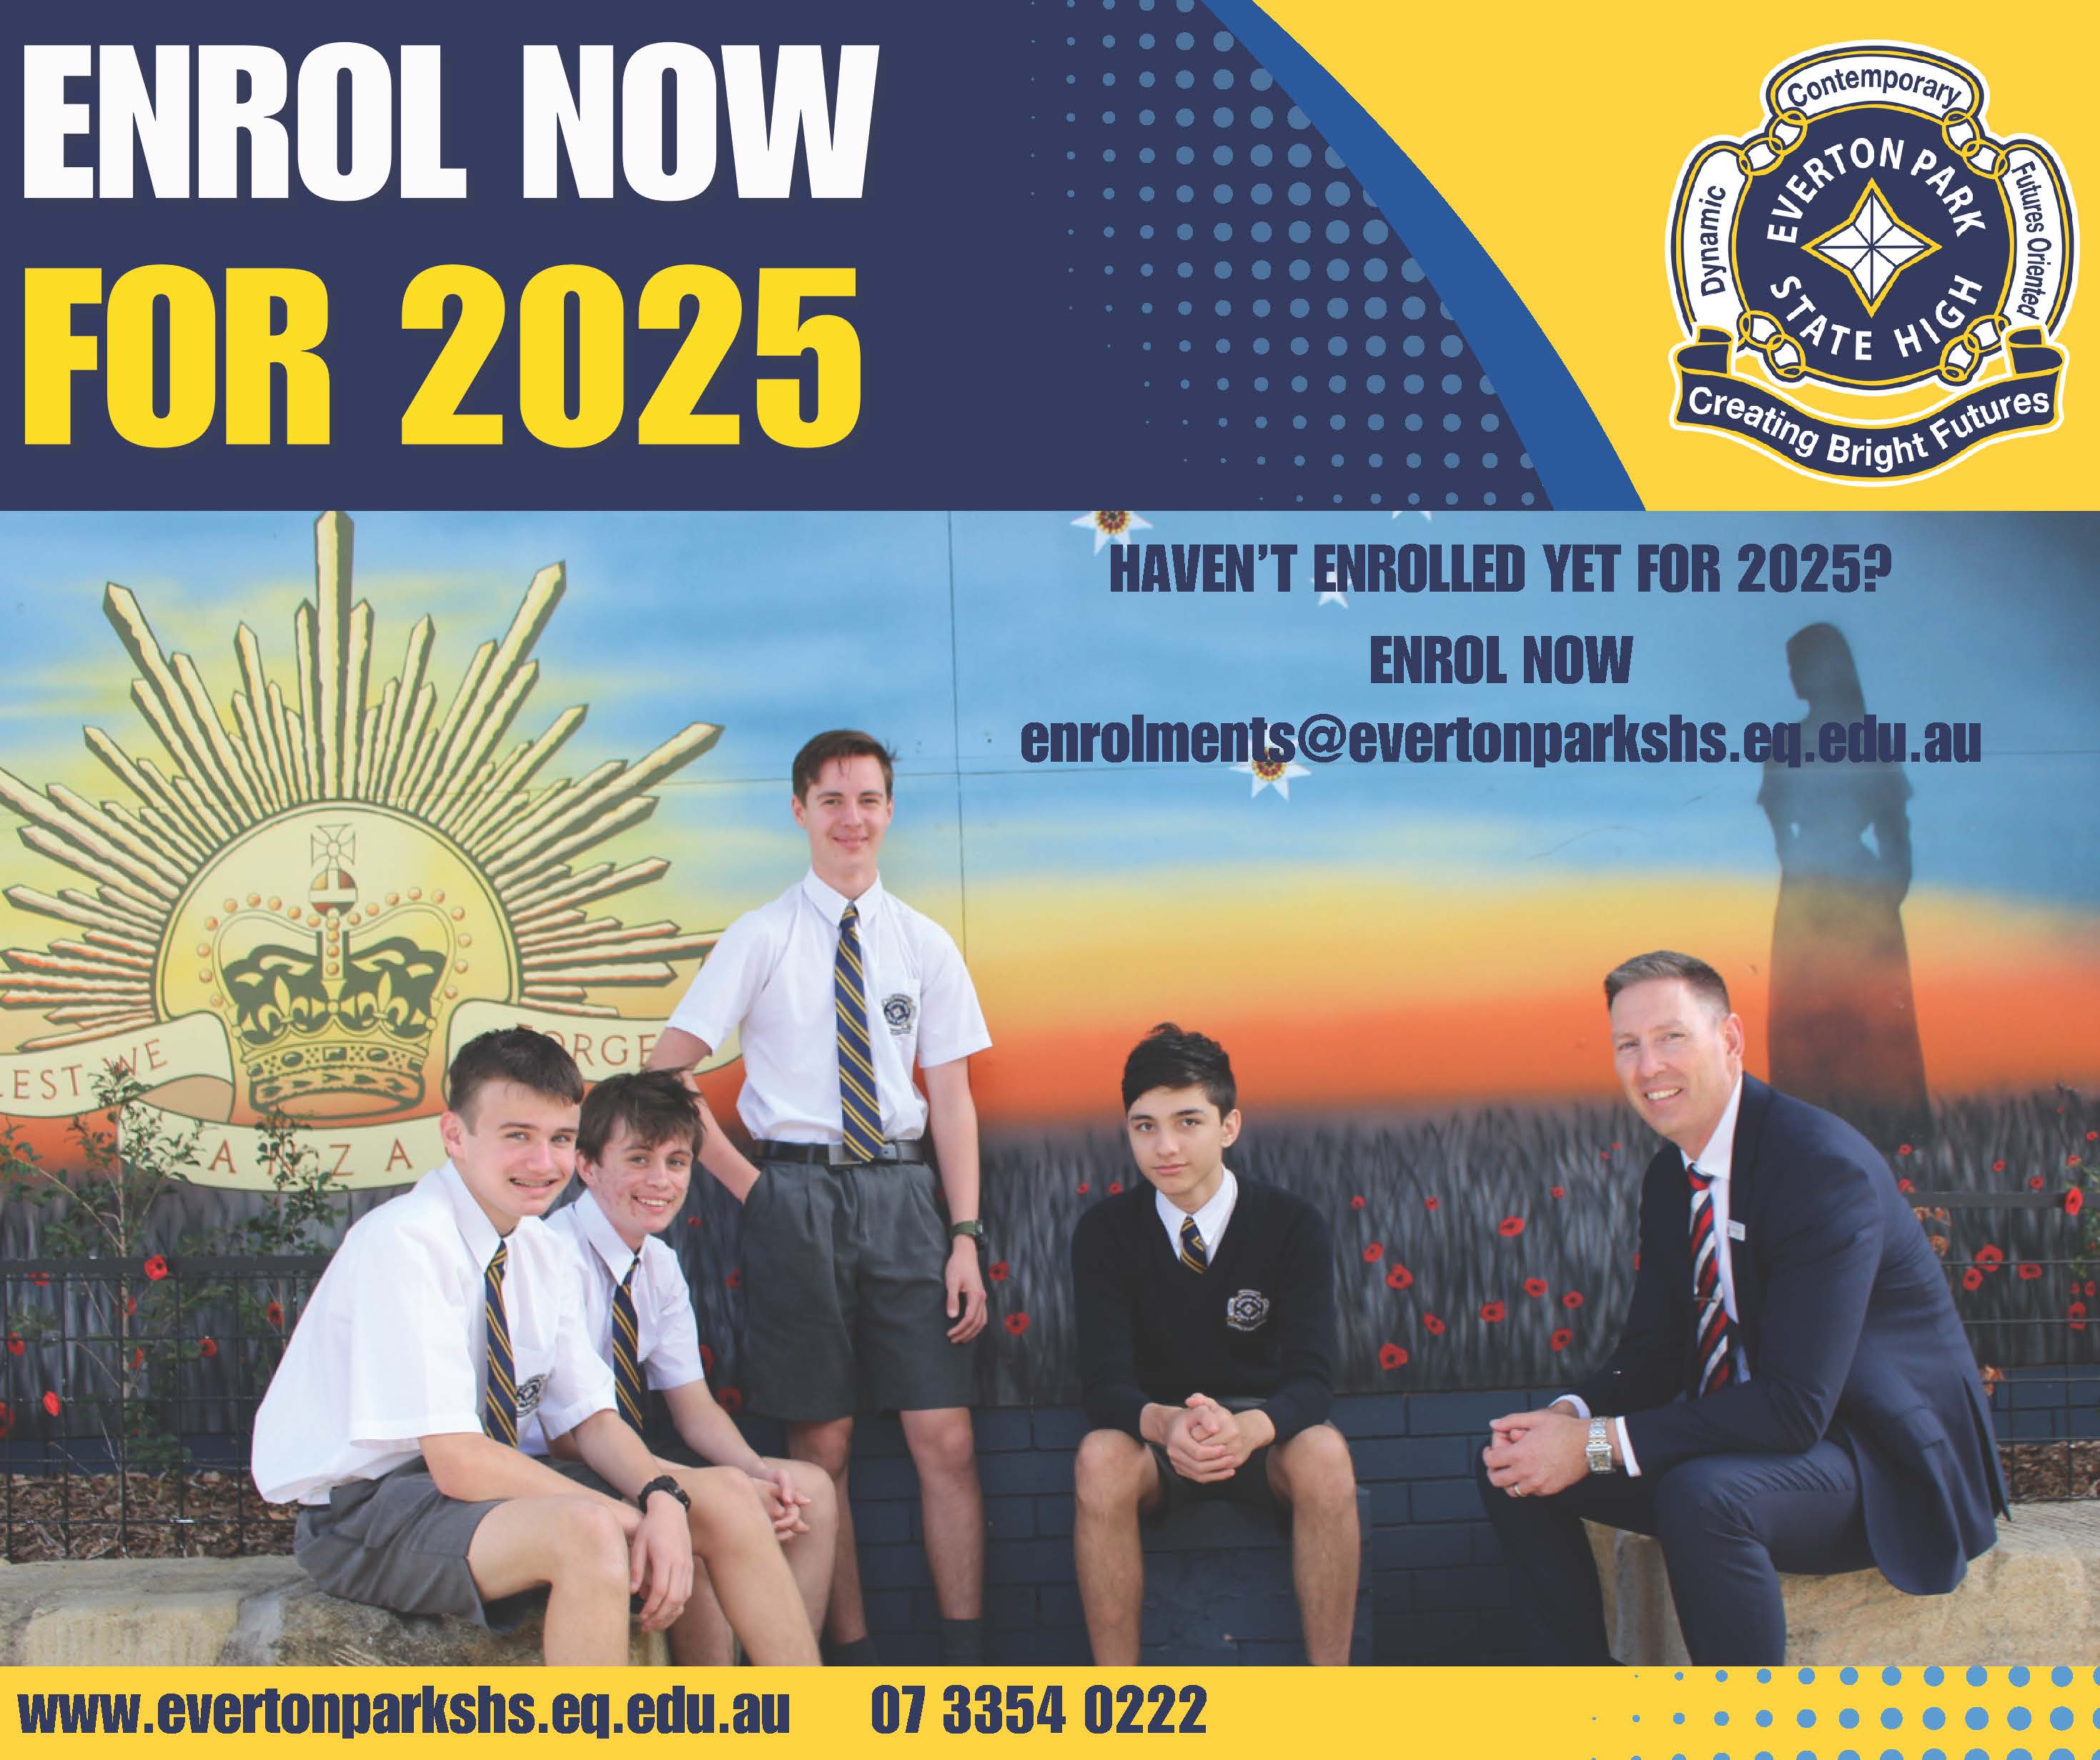 Enrol for 2025 flyers__Page_1.jpg